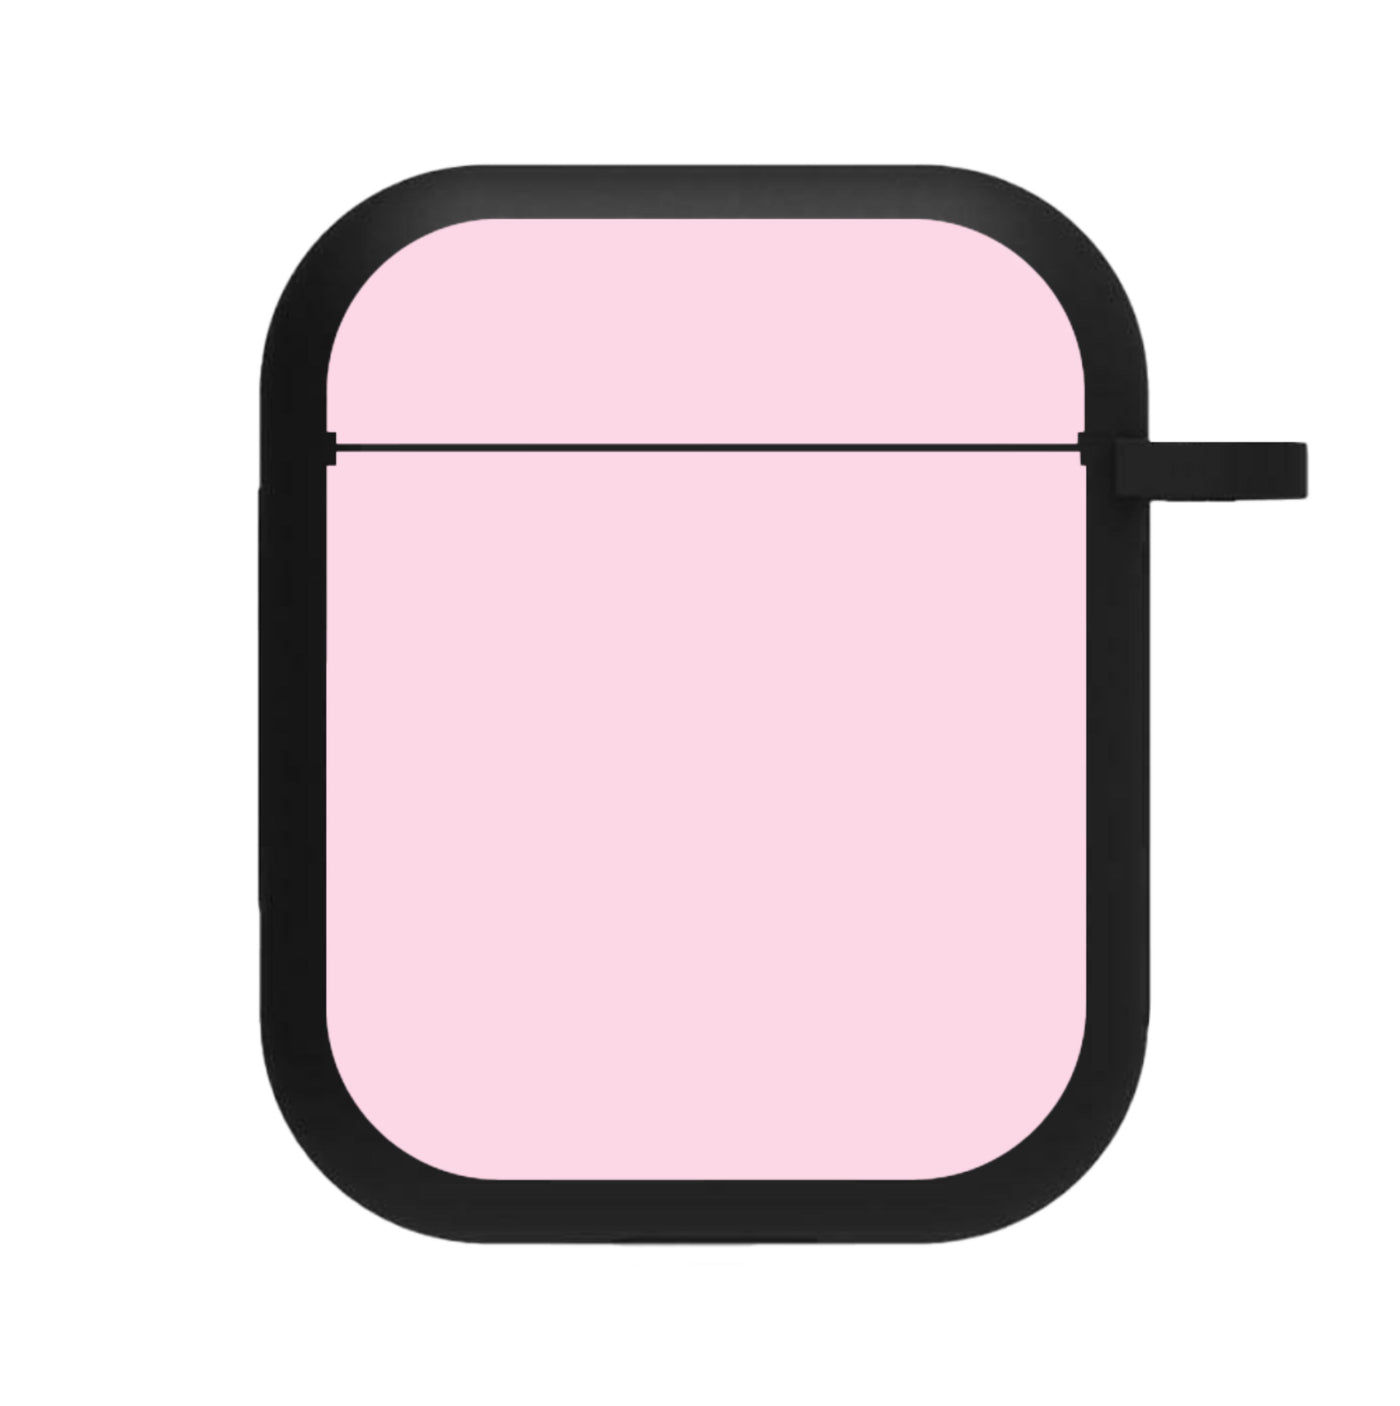 Back To Casics - Pretty Pastels - Plain Pink AirPods Case